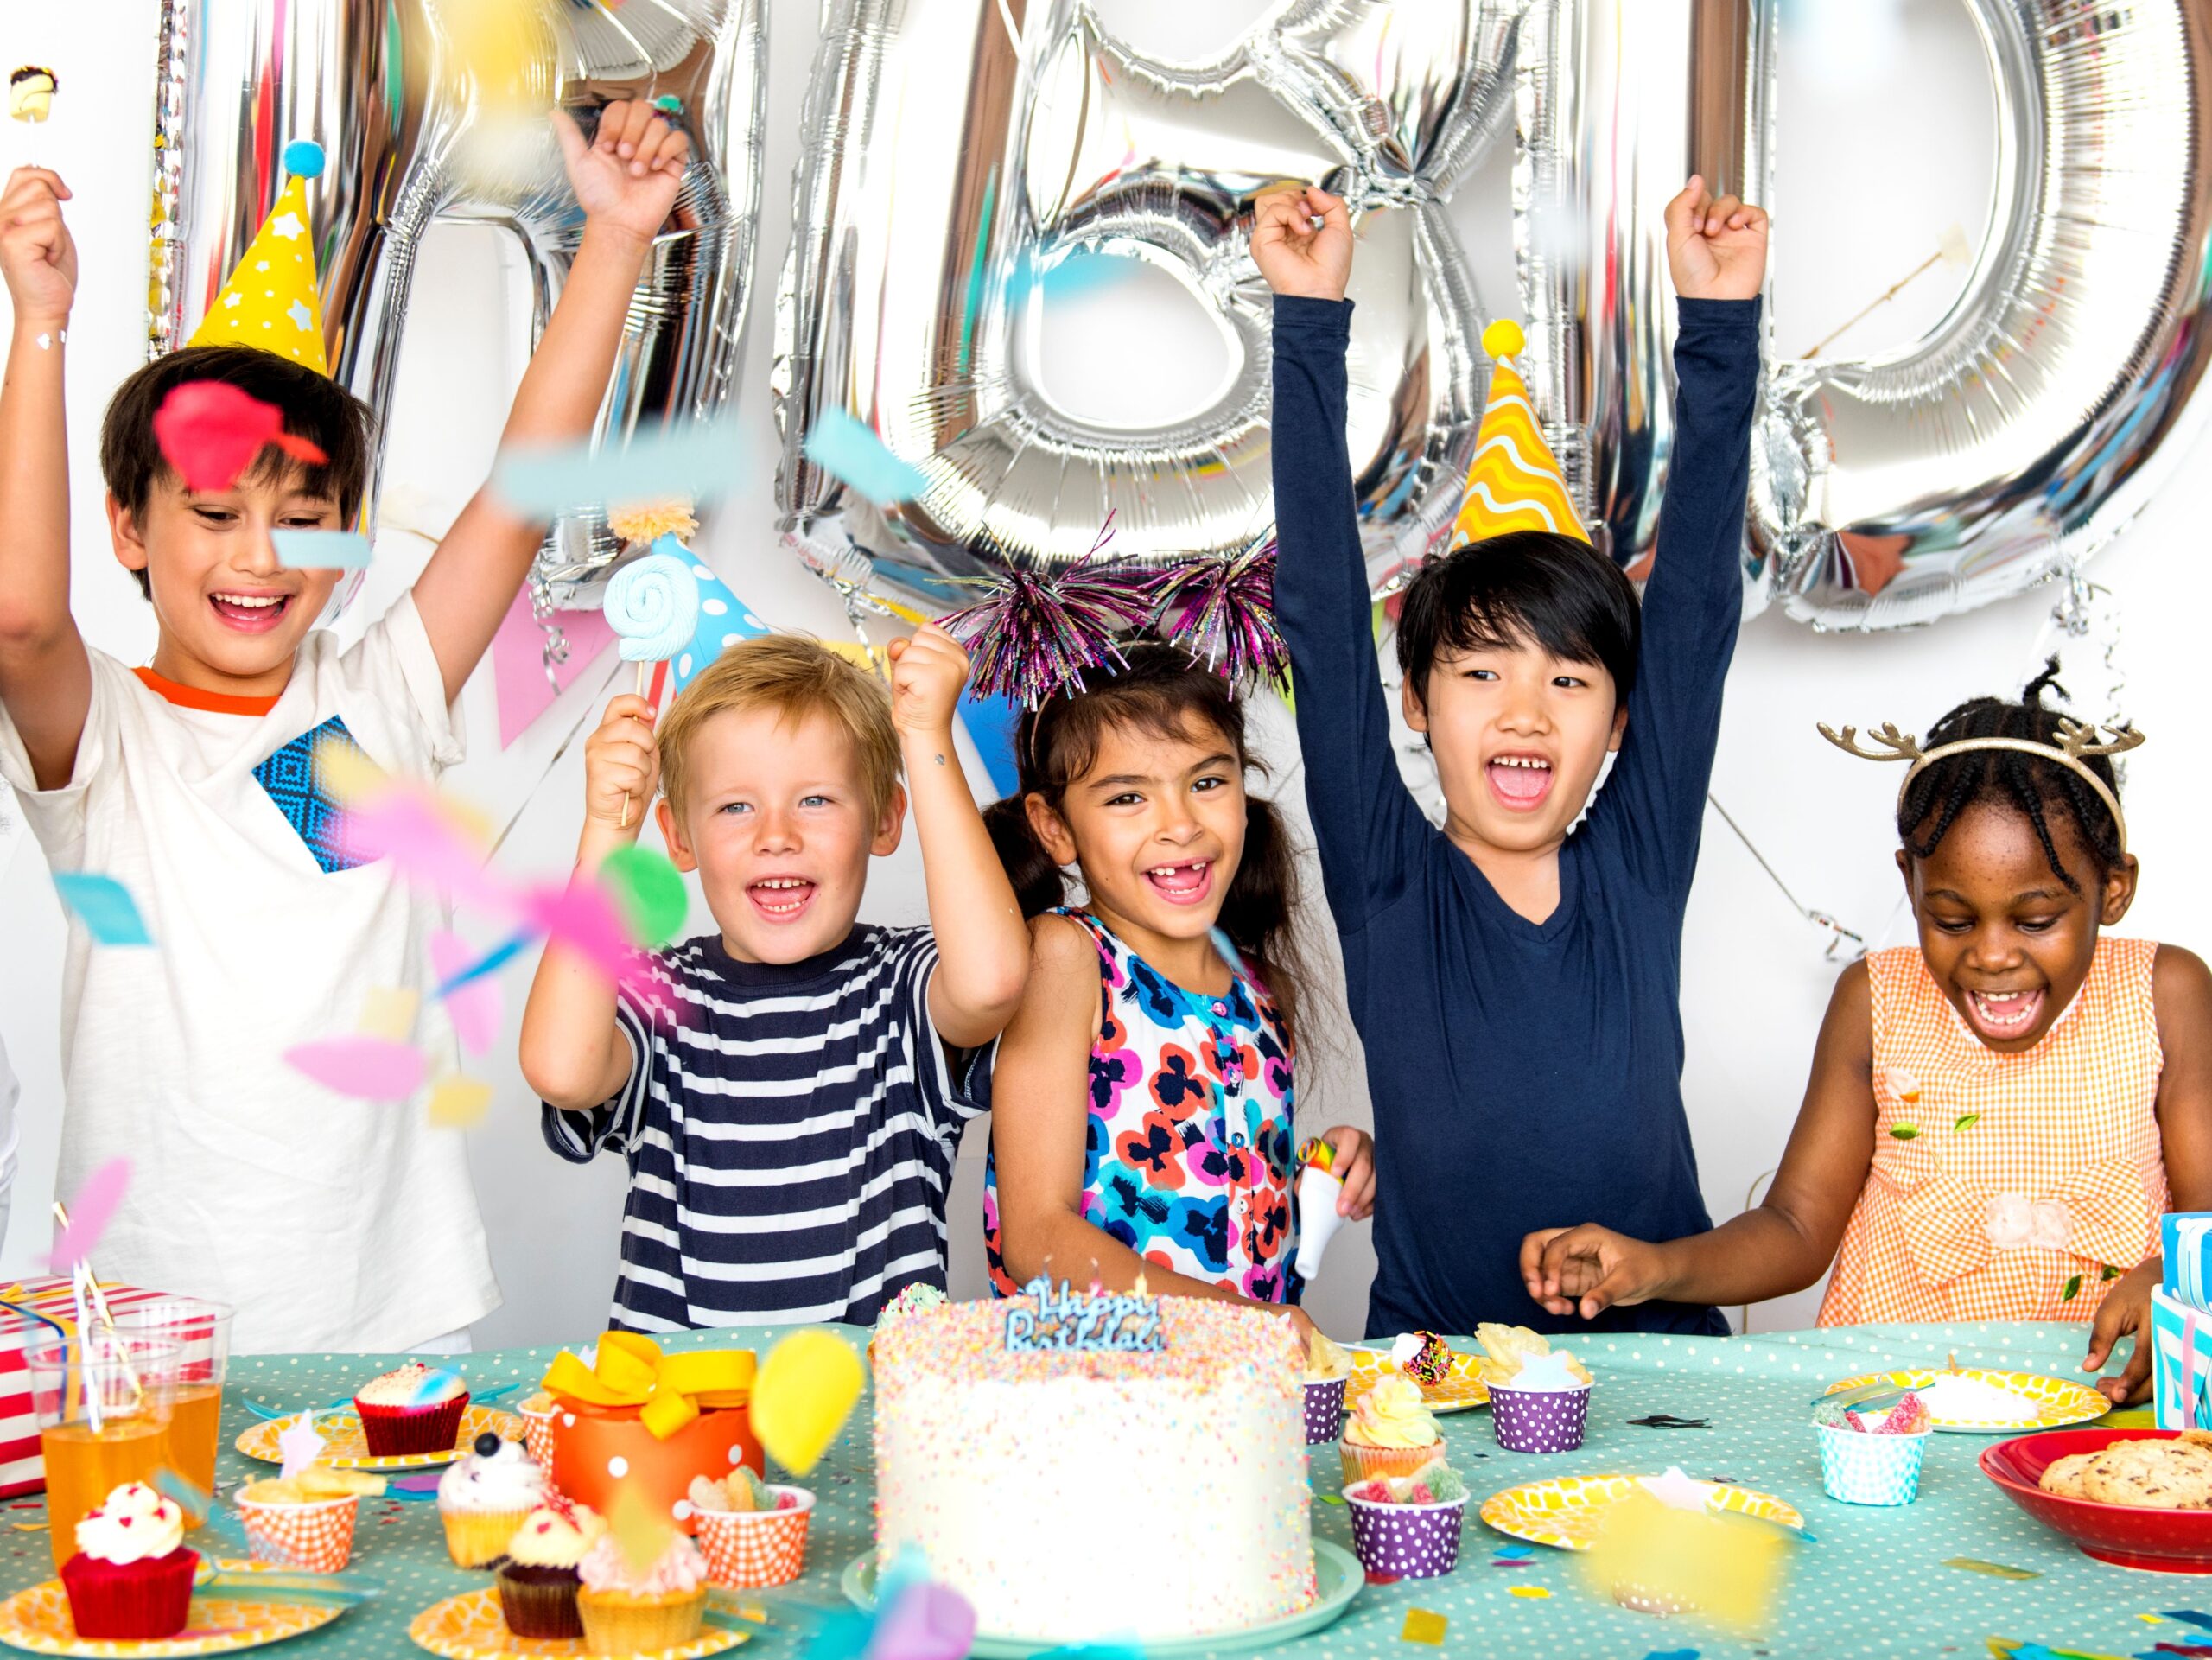 Kids celebrate at a birthday party